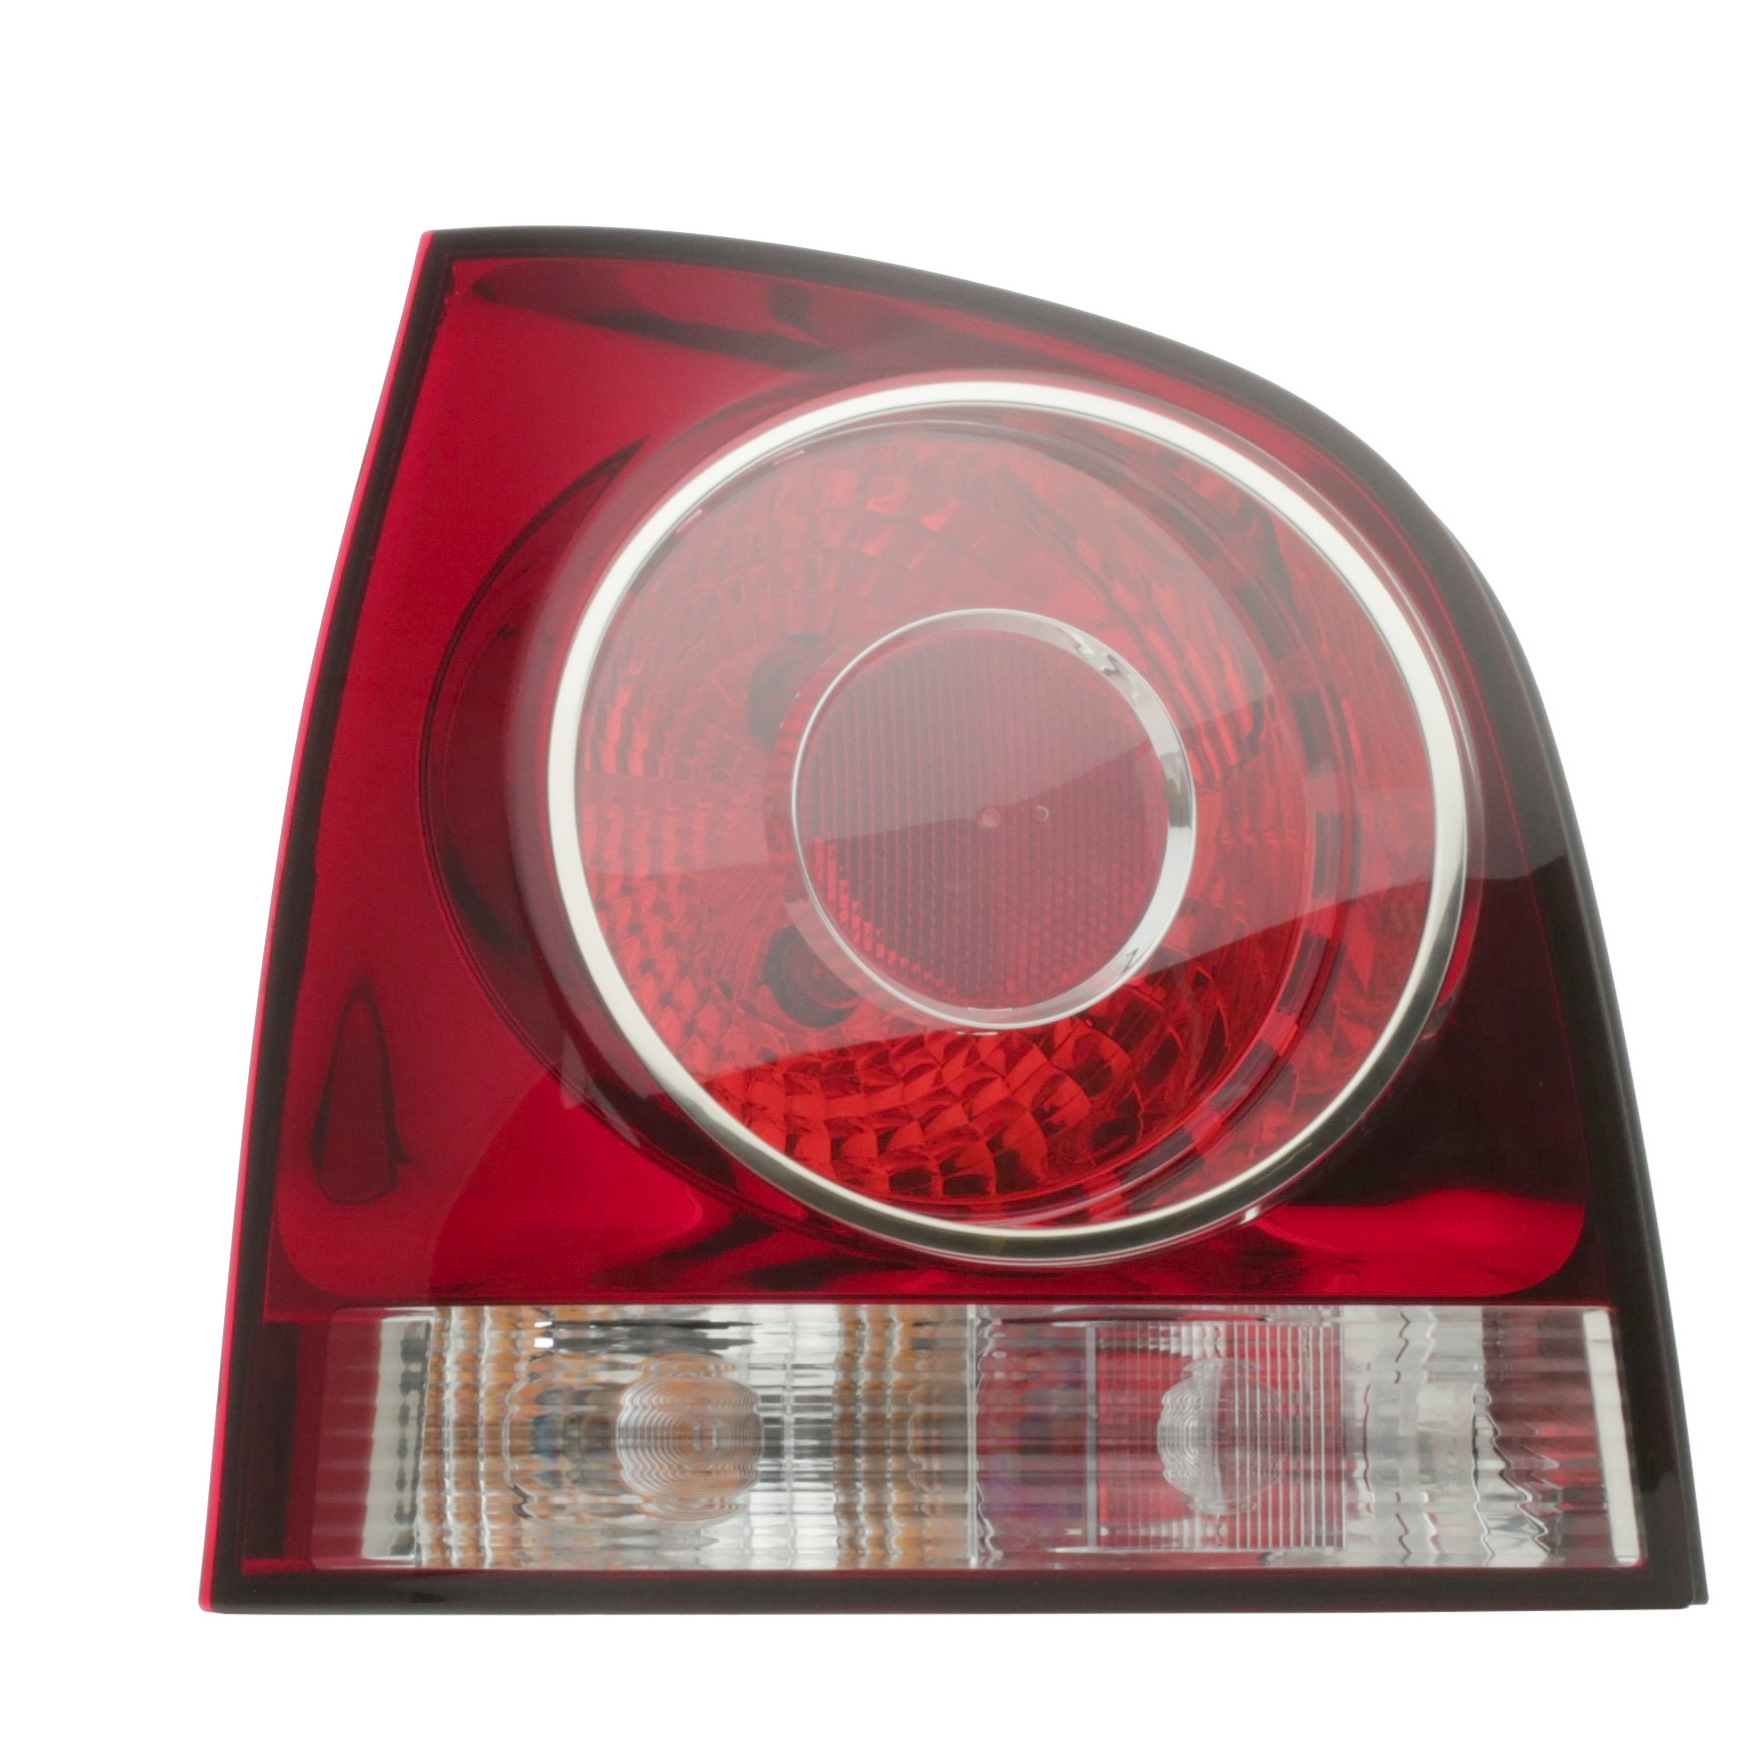 HELLA 2VA 965 303-071 Rear light Left, P21/4W, P21W, PY21W, R5W, 12V, Crystal clear, red, with bulbs, with bulb holder